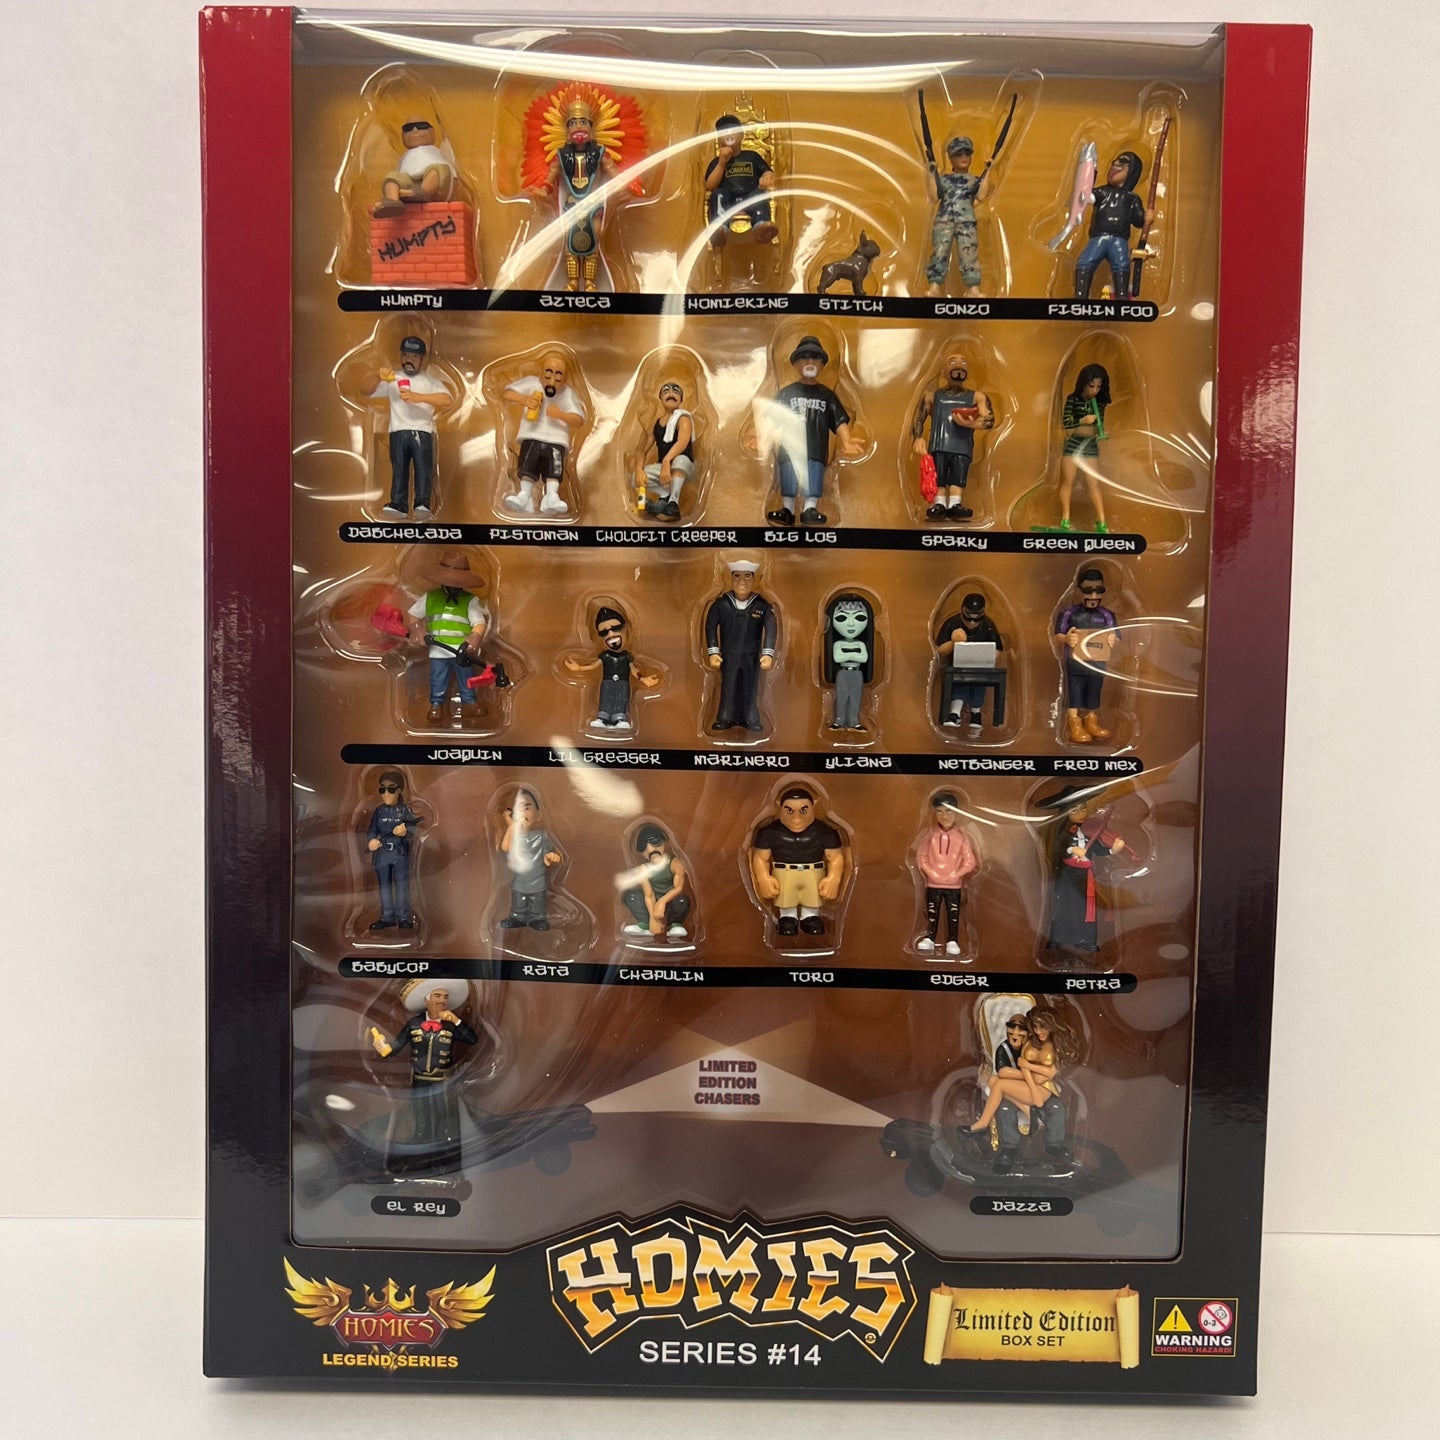 Homies Series #14 Limited Edition Complete Box Set W/ 2 Limited Edition Chasers